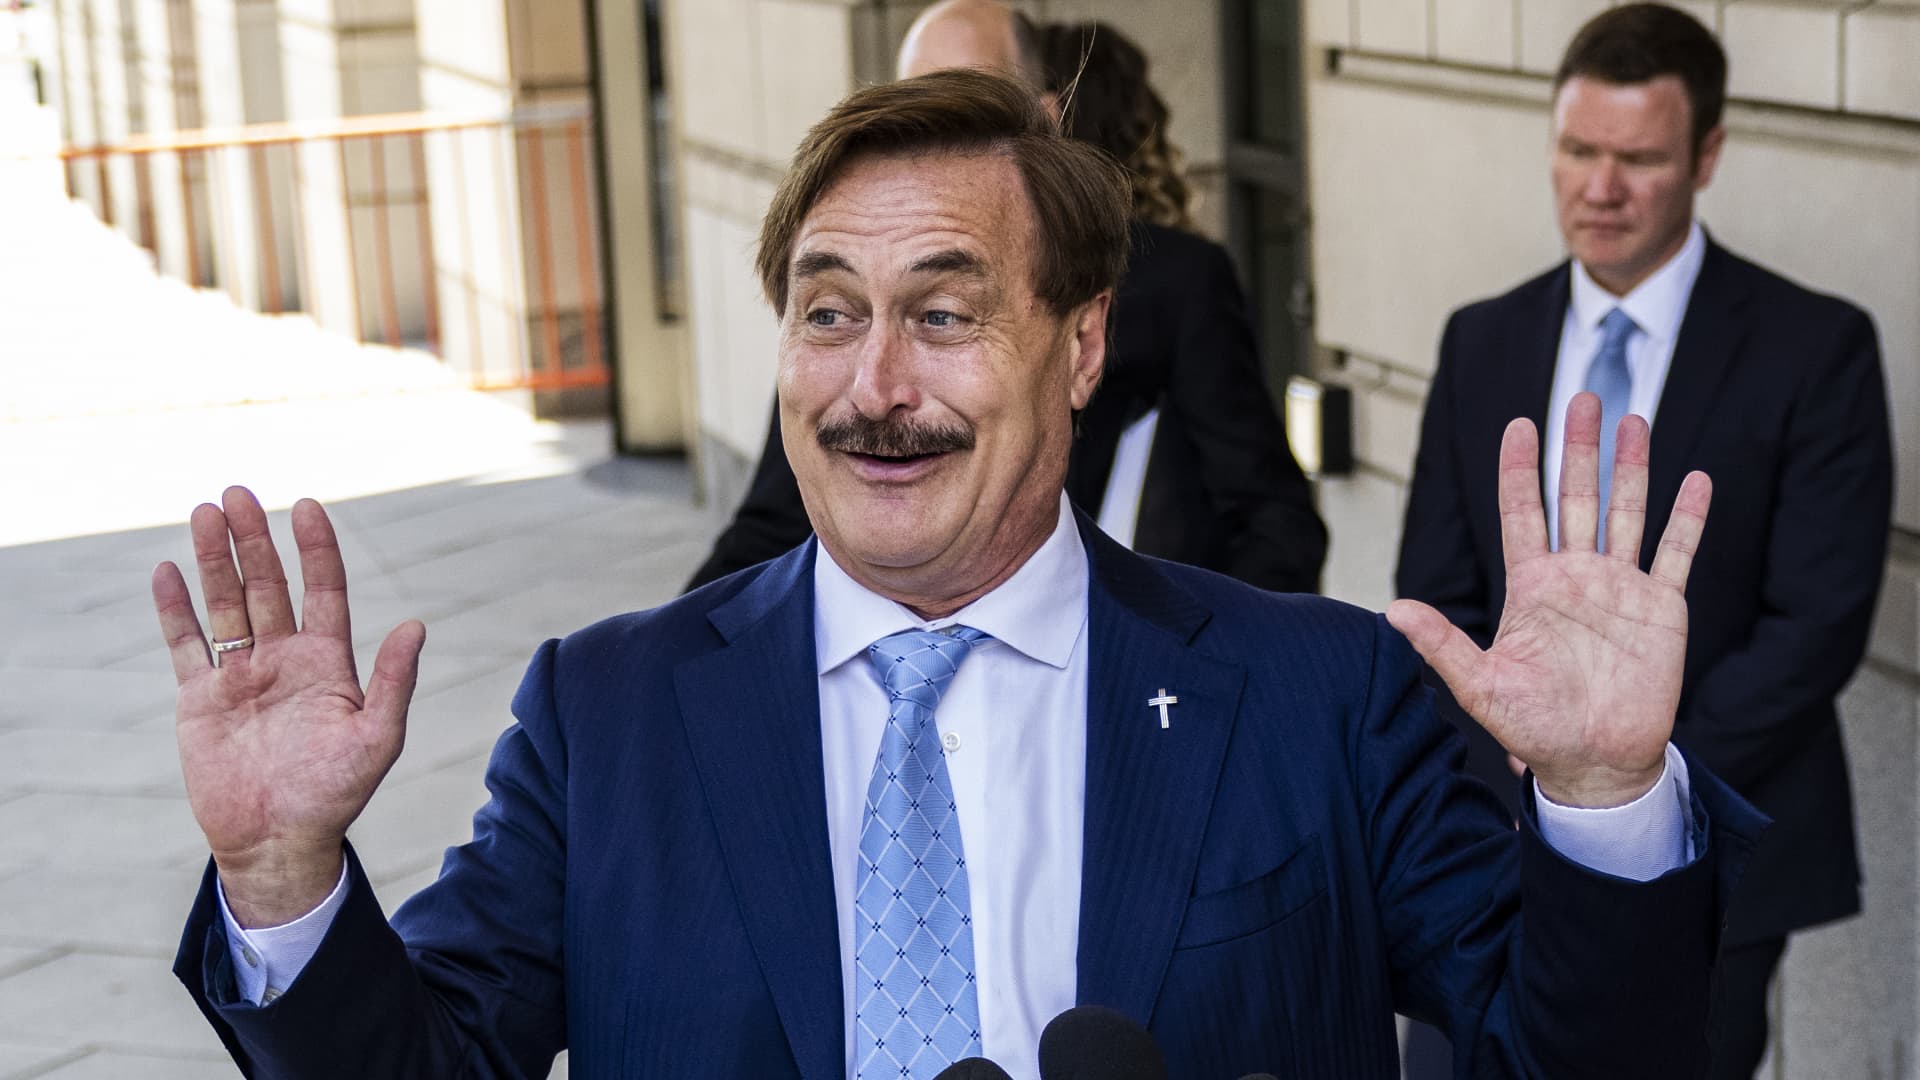 Mike Lindell, chief executive officer of My Pillow Inc., speaks to members of the media while arriving to federal court in Washington, D.C., U.S., on Thursday, June 24, 2021.